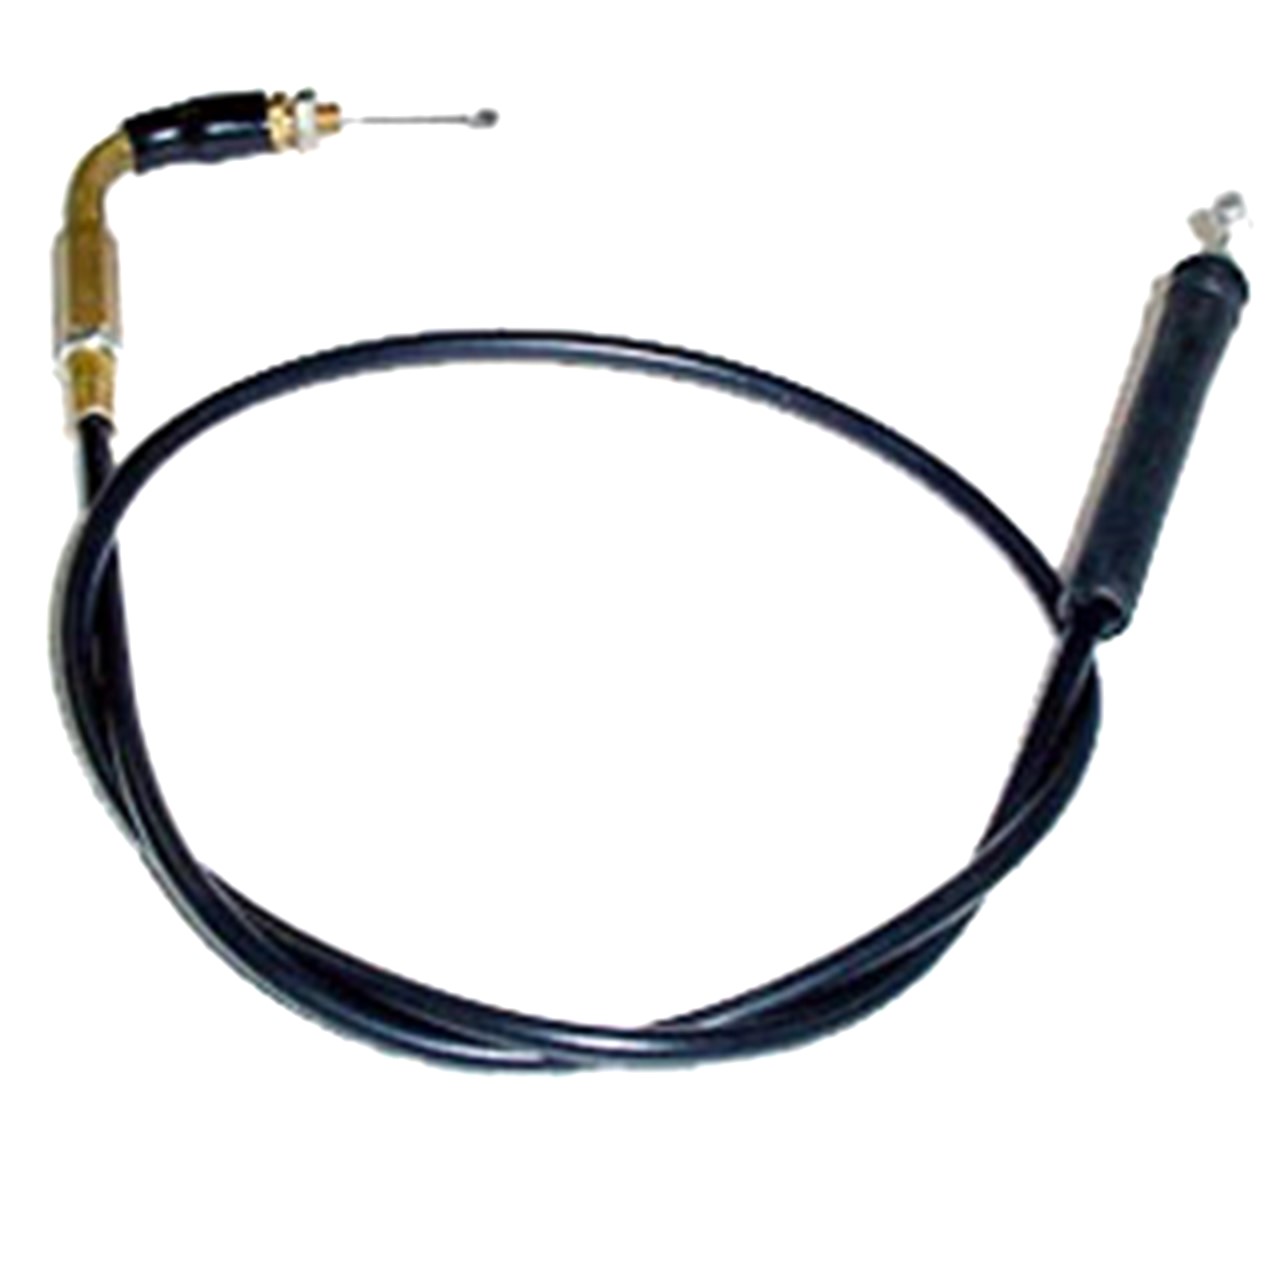 Throttle Cable Fits E-Ton Rascal, Viper Jr RXL40cc ATVs + Dirtbikes Out=34"/Inner Wire=35.5"